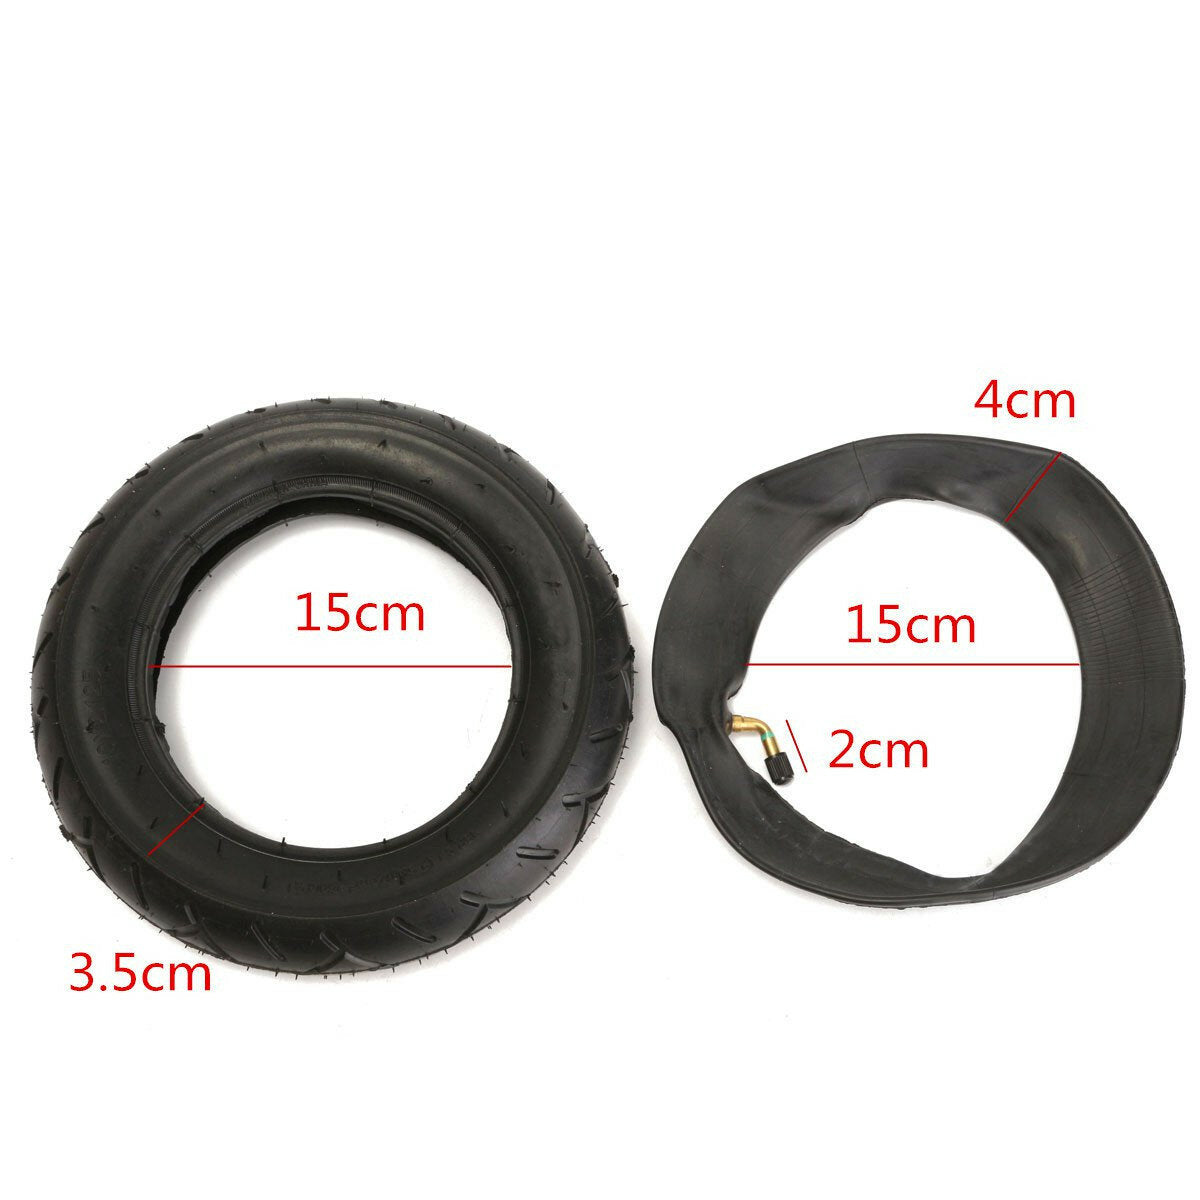 10 x 2.125' Electric Scooter Tire + Inner Tube Scooter Wheels for Balancing Scooter